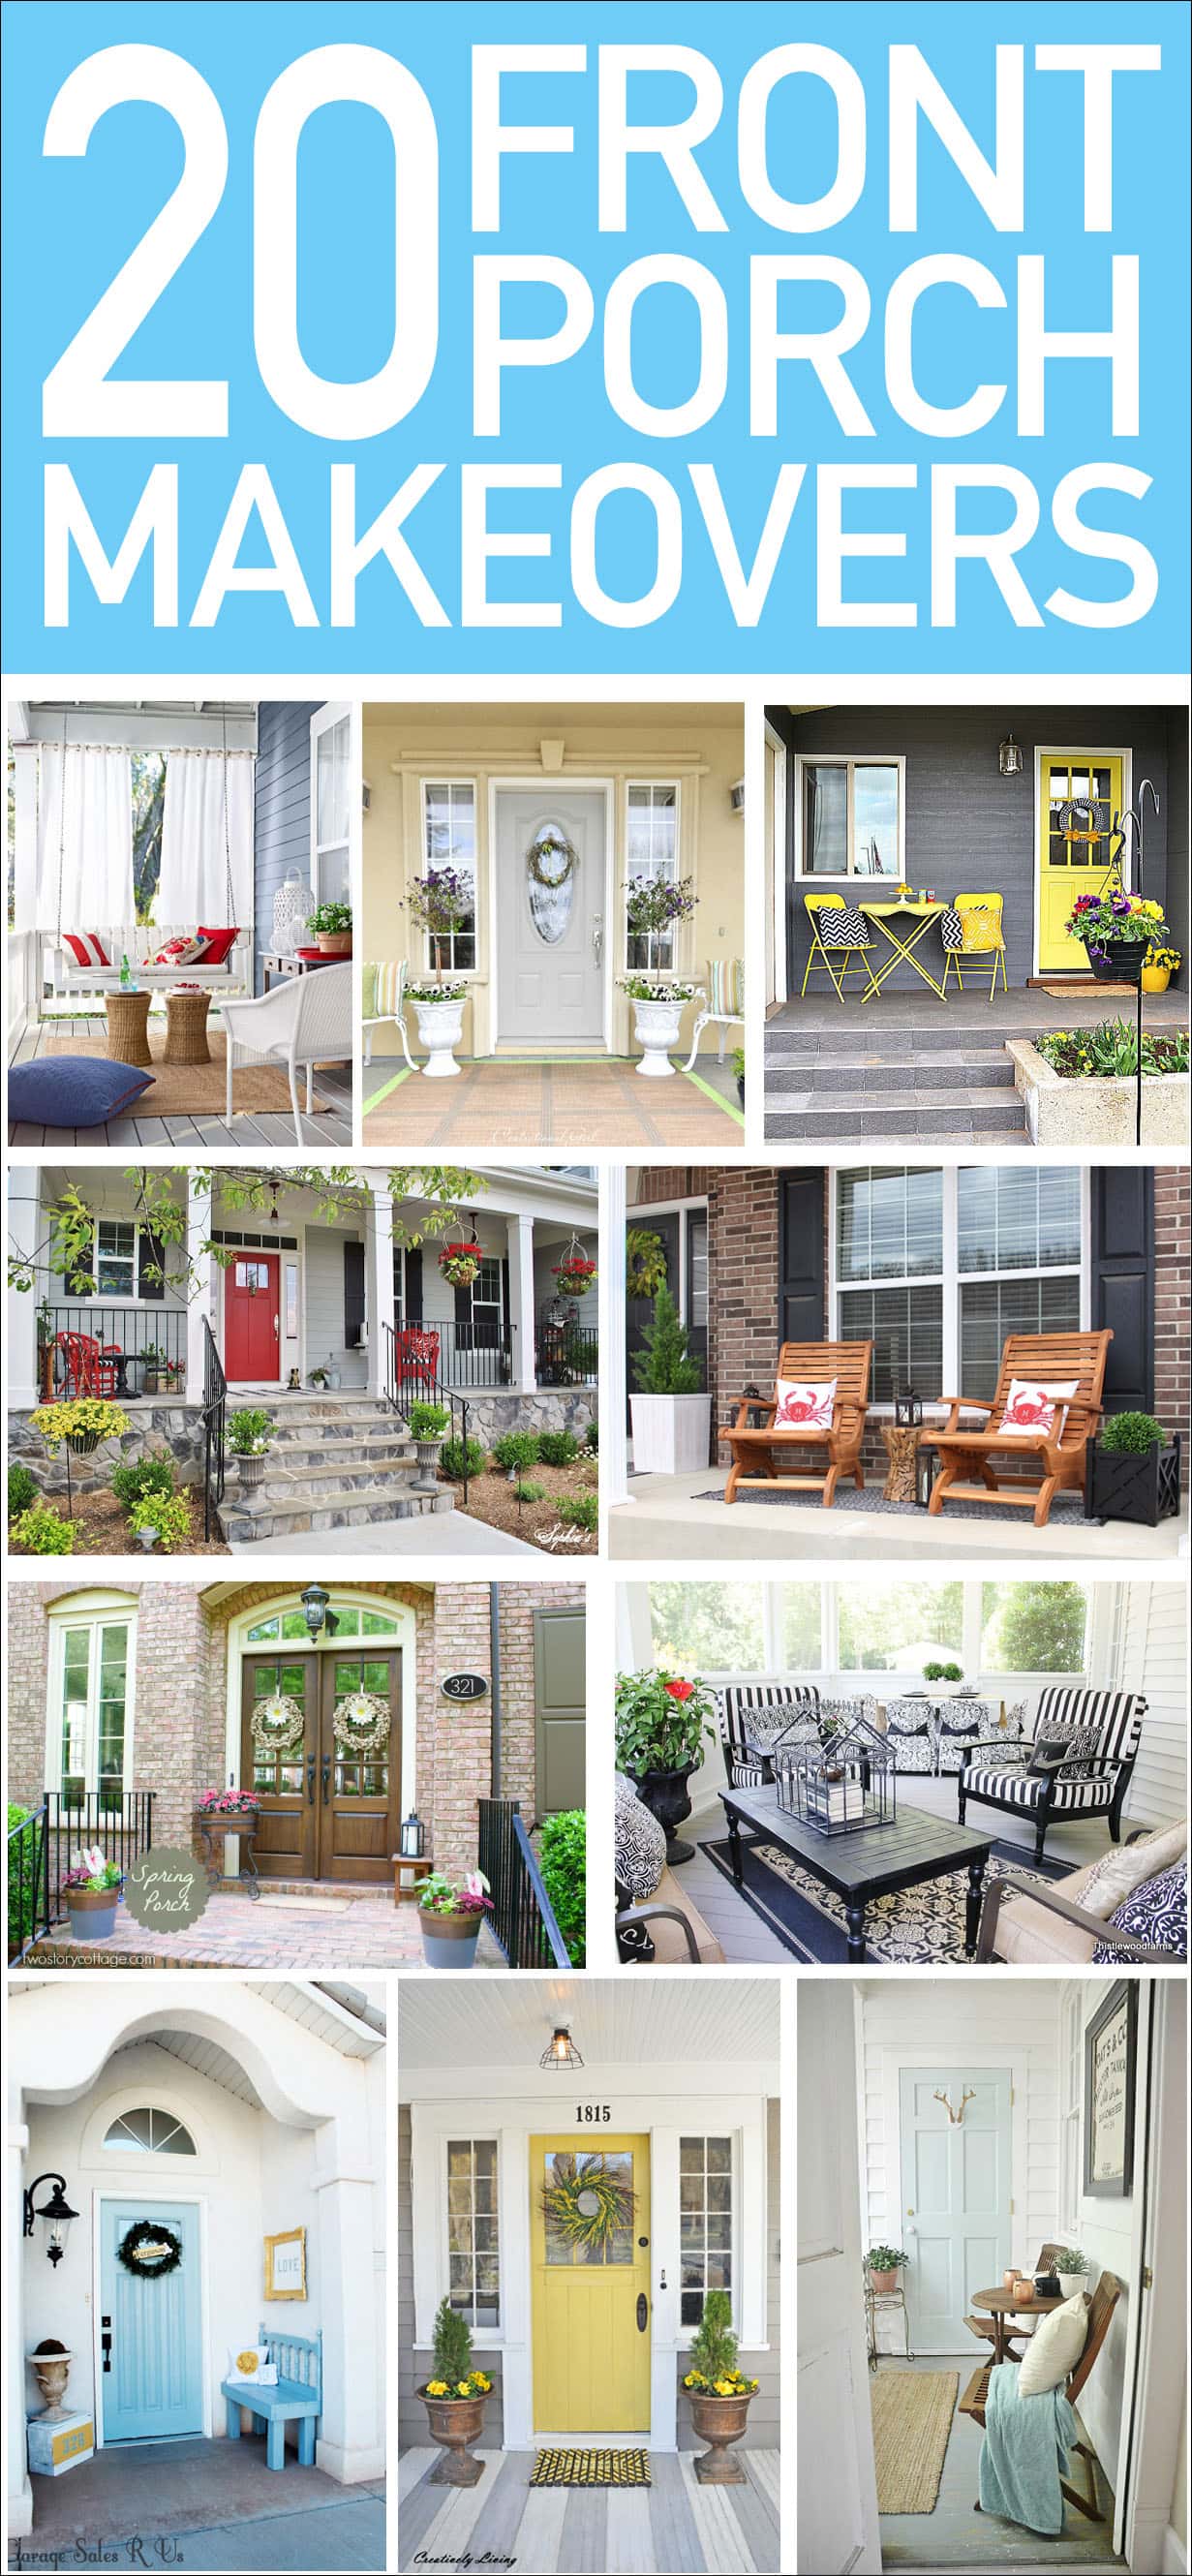 20 front porch makeovers